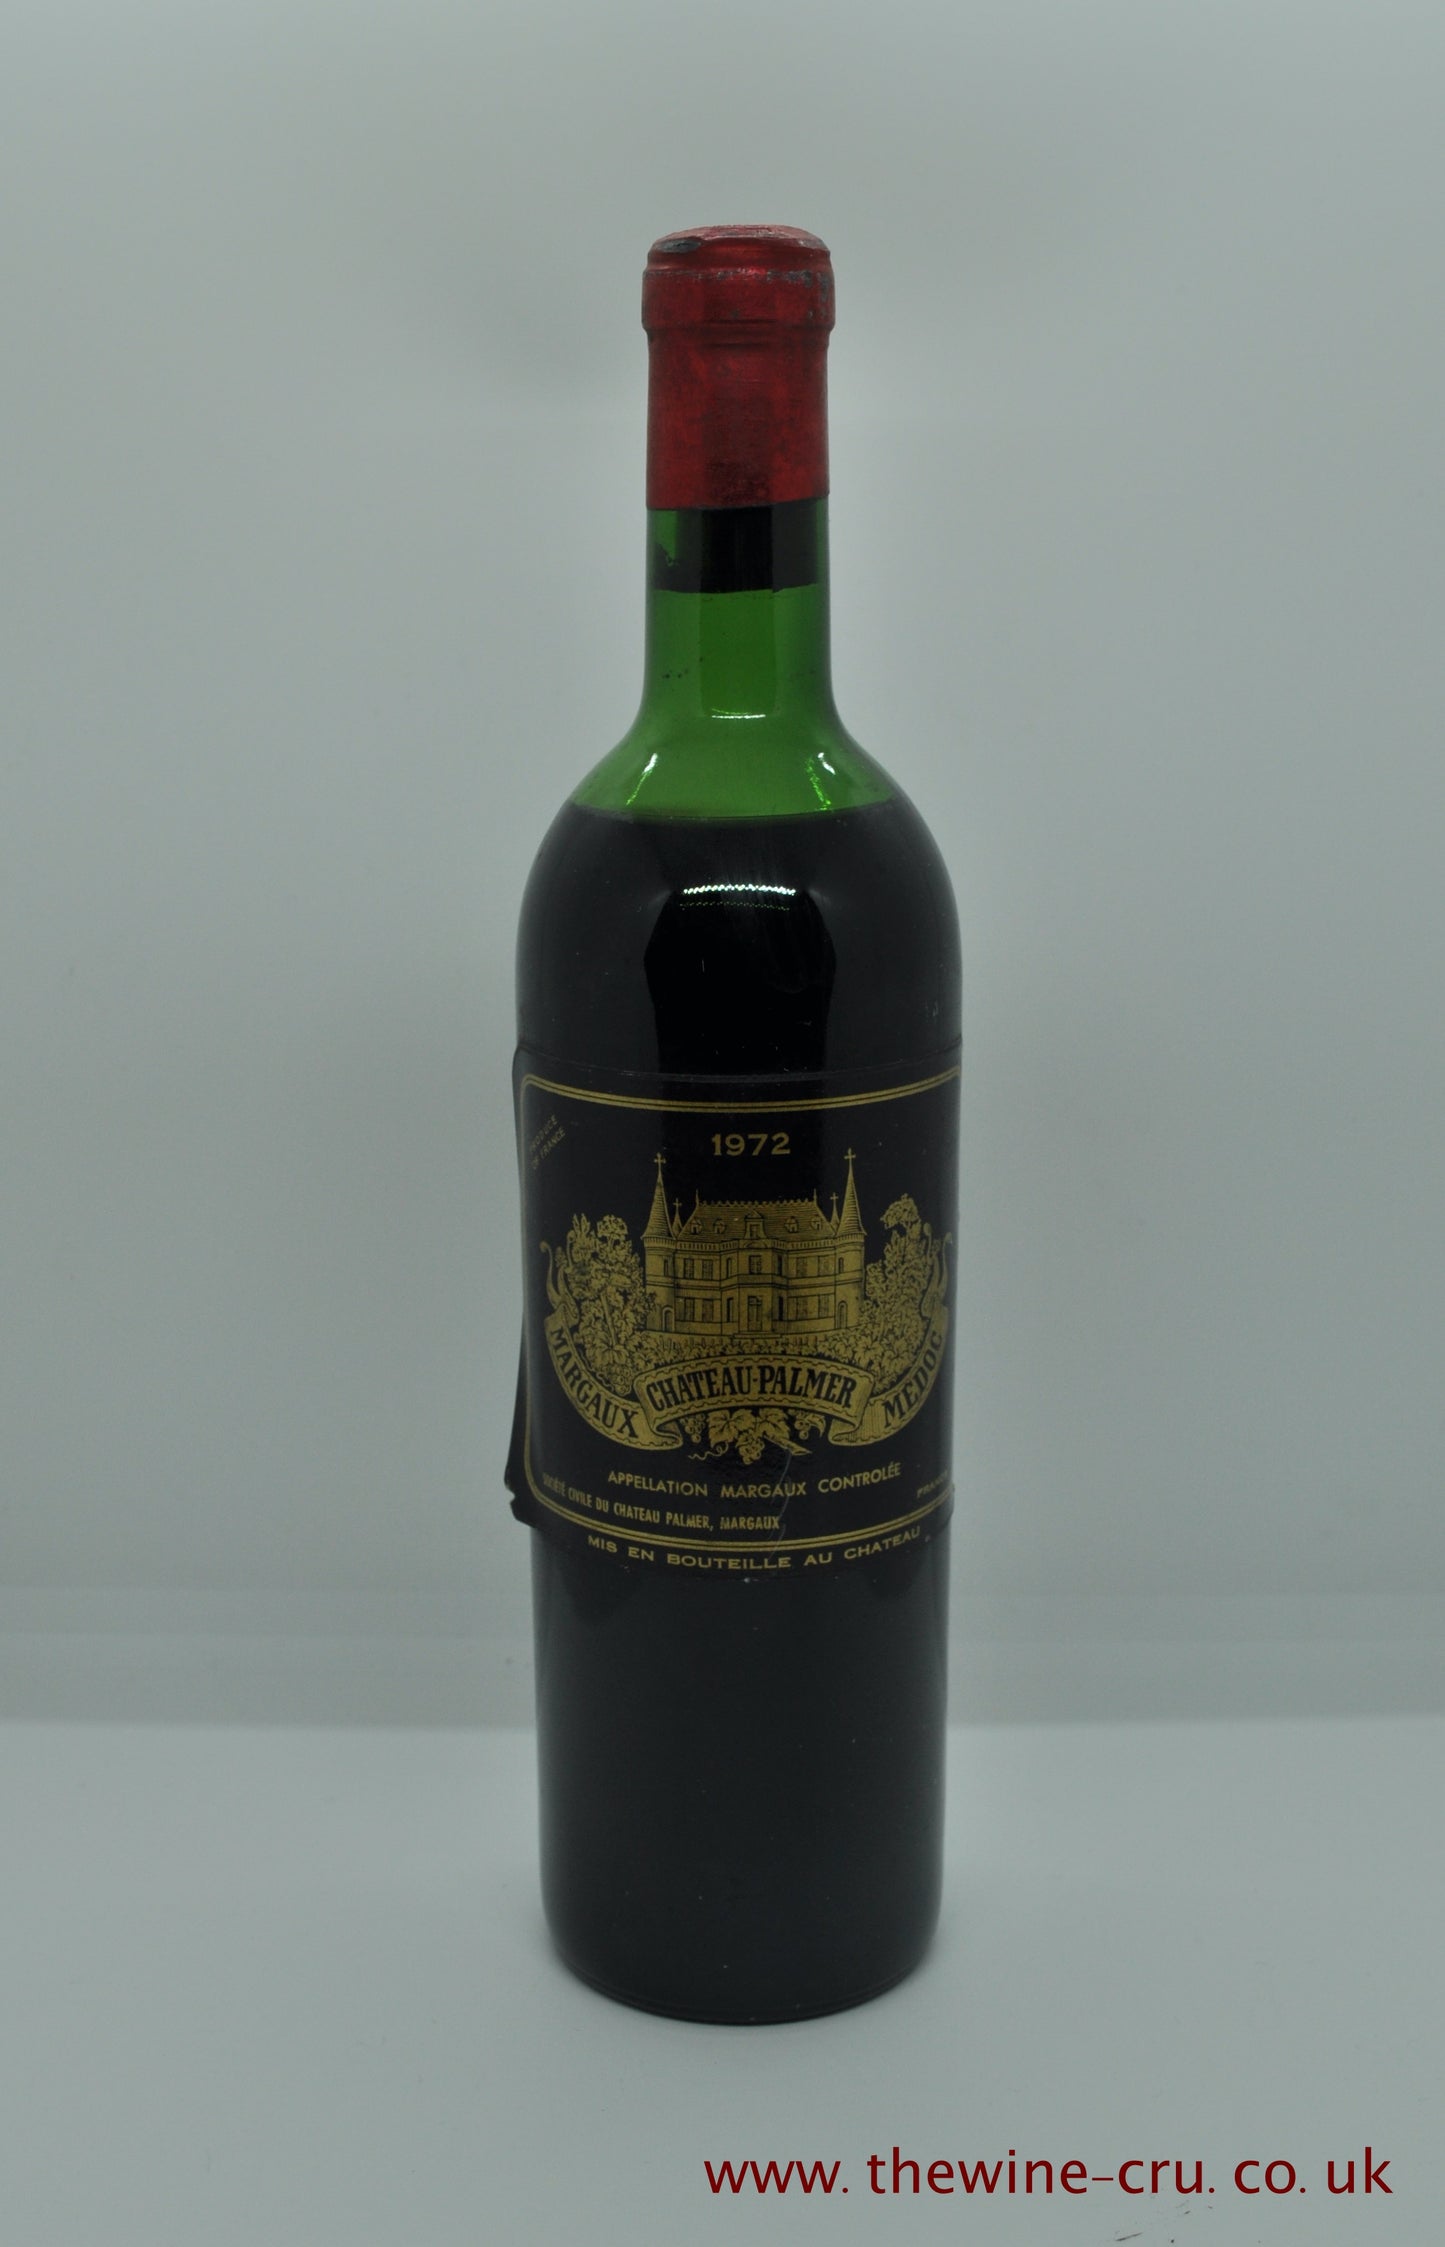 1972 vintage red wine. Chateau Palmer 1972. France Bordeaux. Immediate delivery. Free local delivery.